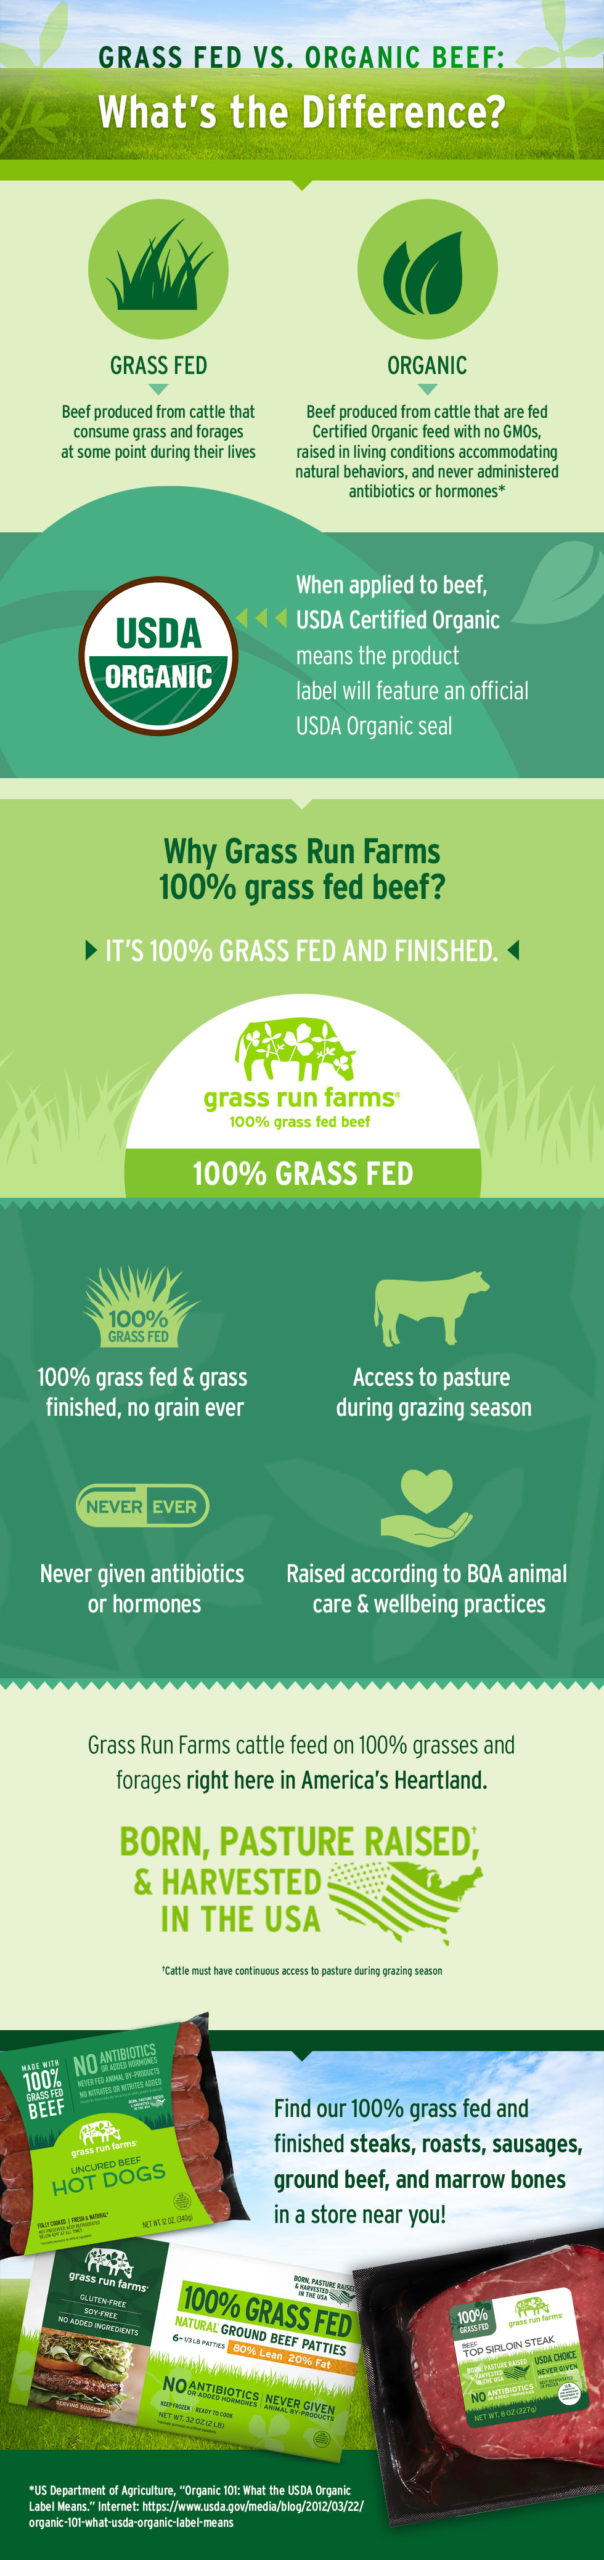 Grass Fed vs Organic Beef Infographic